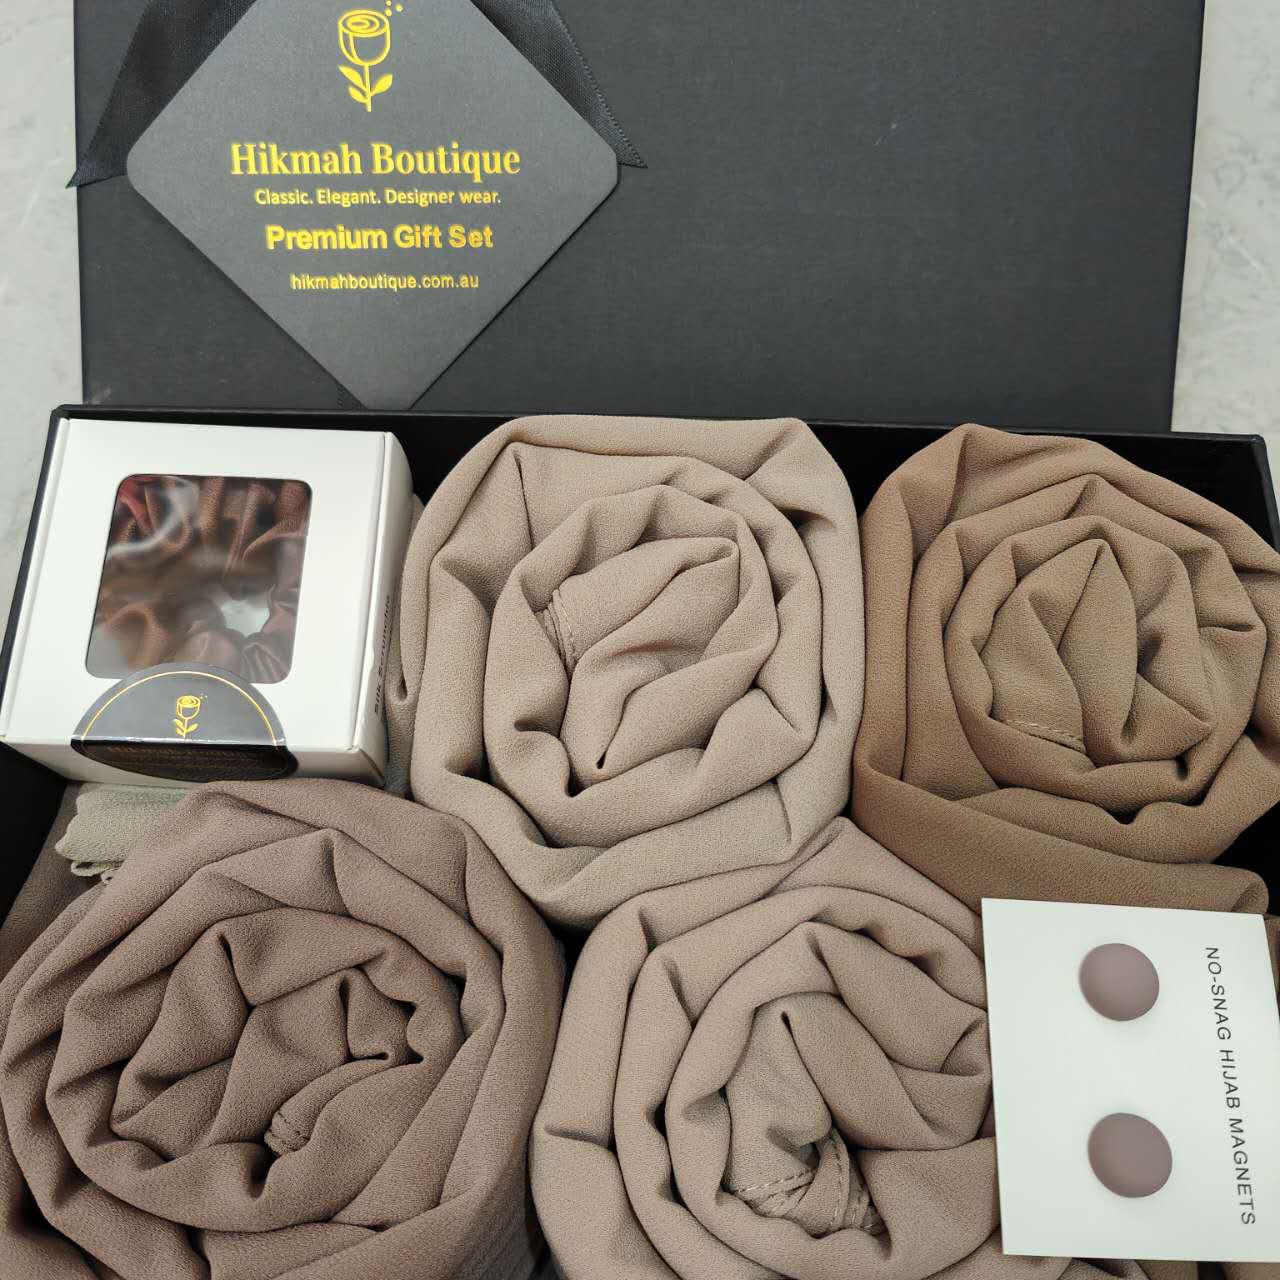 Indulge in the luxury of Hikmah Boutique's Chiffon Hijab Gift Box - The Tan Set. This gift box is the perfect style of sophistication, style and elegance. This set includes 4 premium quality chiffon hijabs in the most versatile colors of light taupe, chocolate, Desert Palm and Almandine, to suit every mood. Perfect Gift!